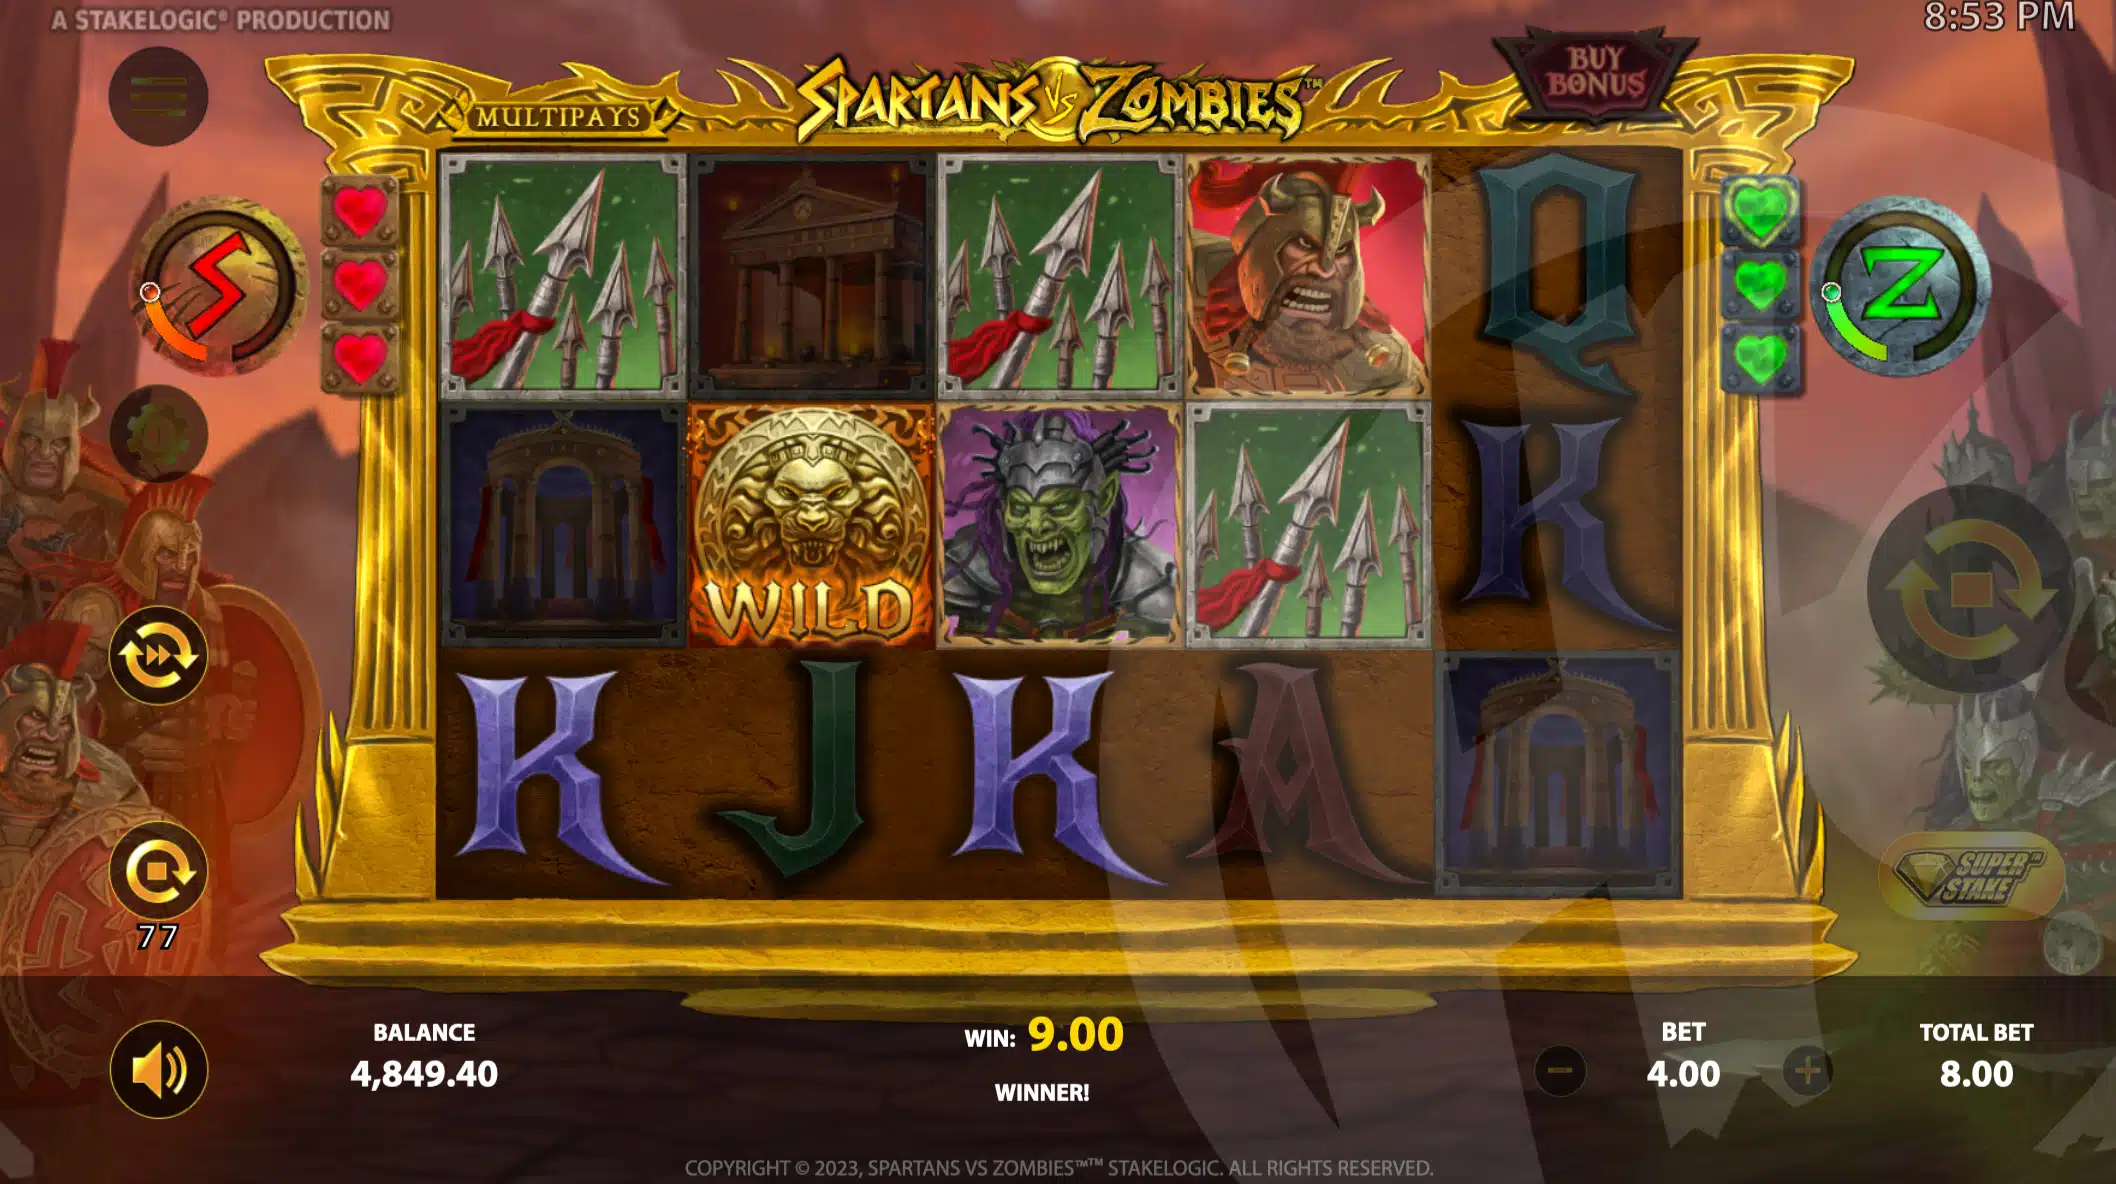 Land Zombie or Spartan Symbols to Advance Meters and Progress Towards Free Spins